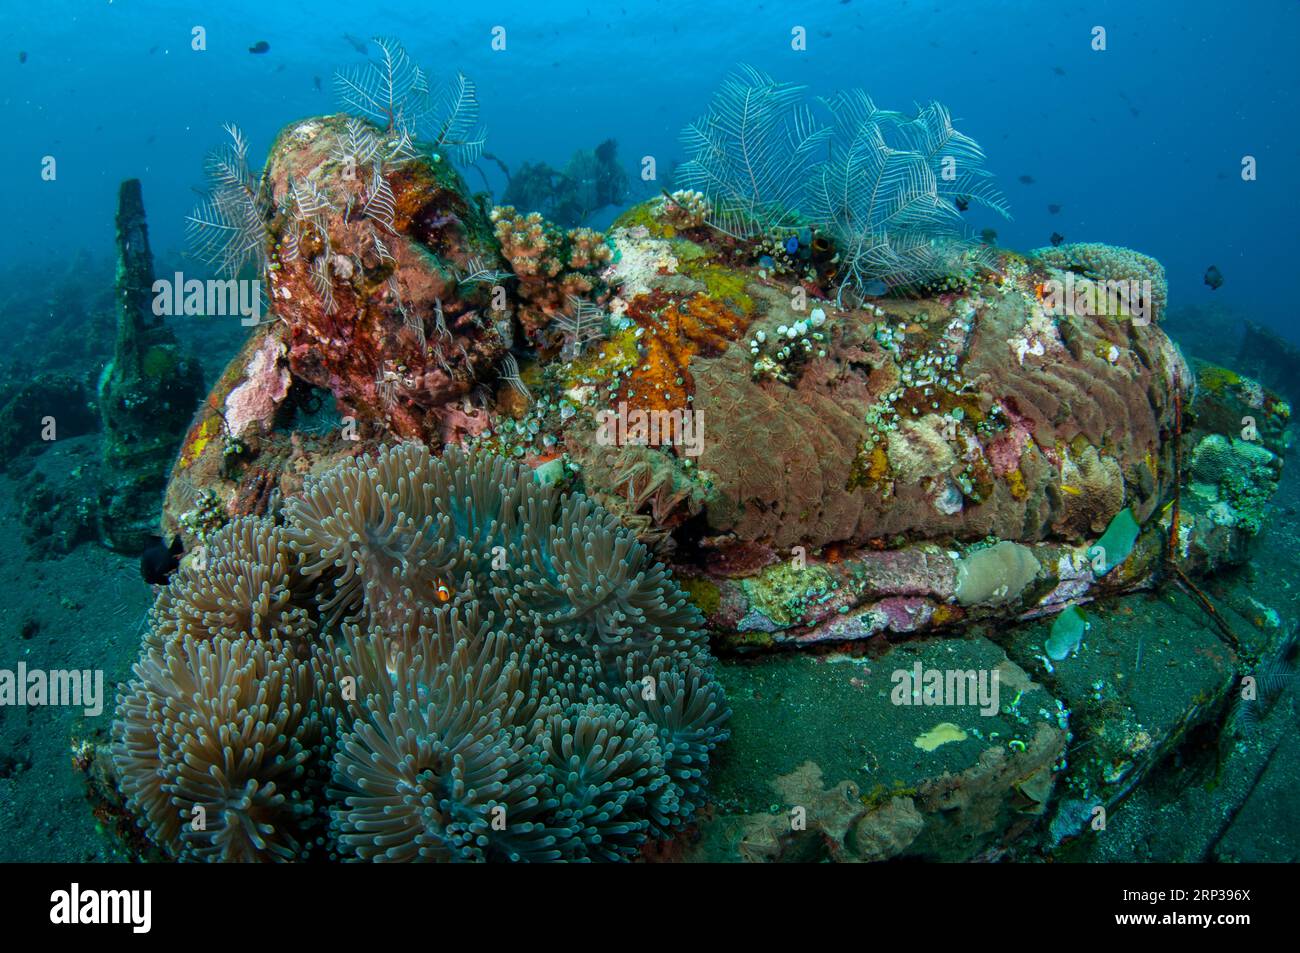 Reclining Buddha statue on sea bed with False Clown Anemonefish, Amphiprion ocellaris, in Magnificent Sea Anemone, Heteractis magnifica, Coral Garden Stock Photo